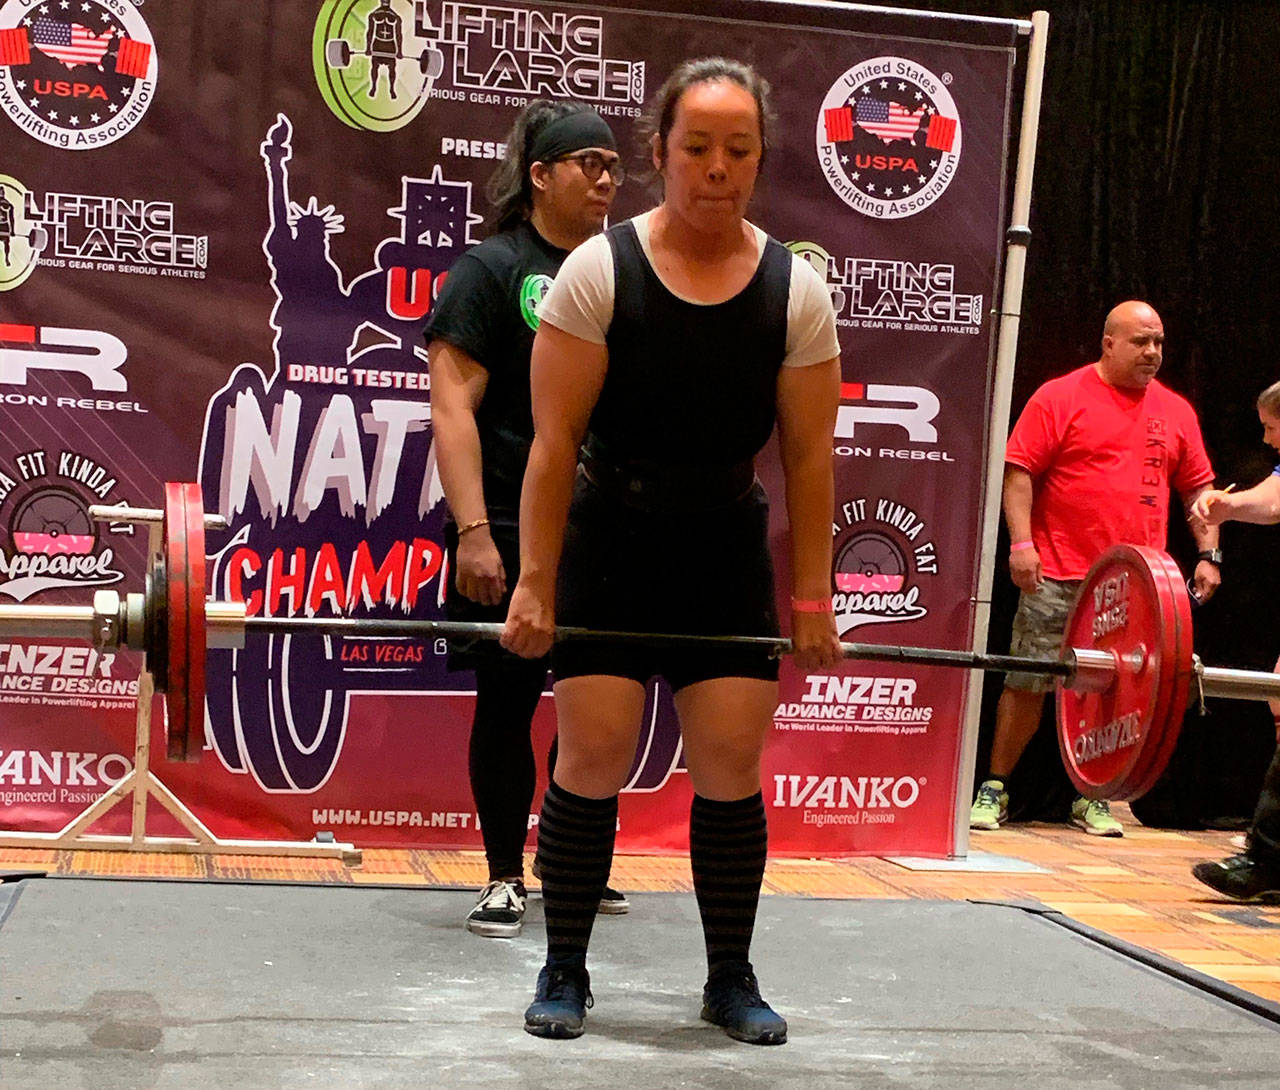 Sherry Phay competes in the dead lift at the national tournament last weekend. (Photo by Sofia Phay)